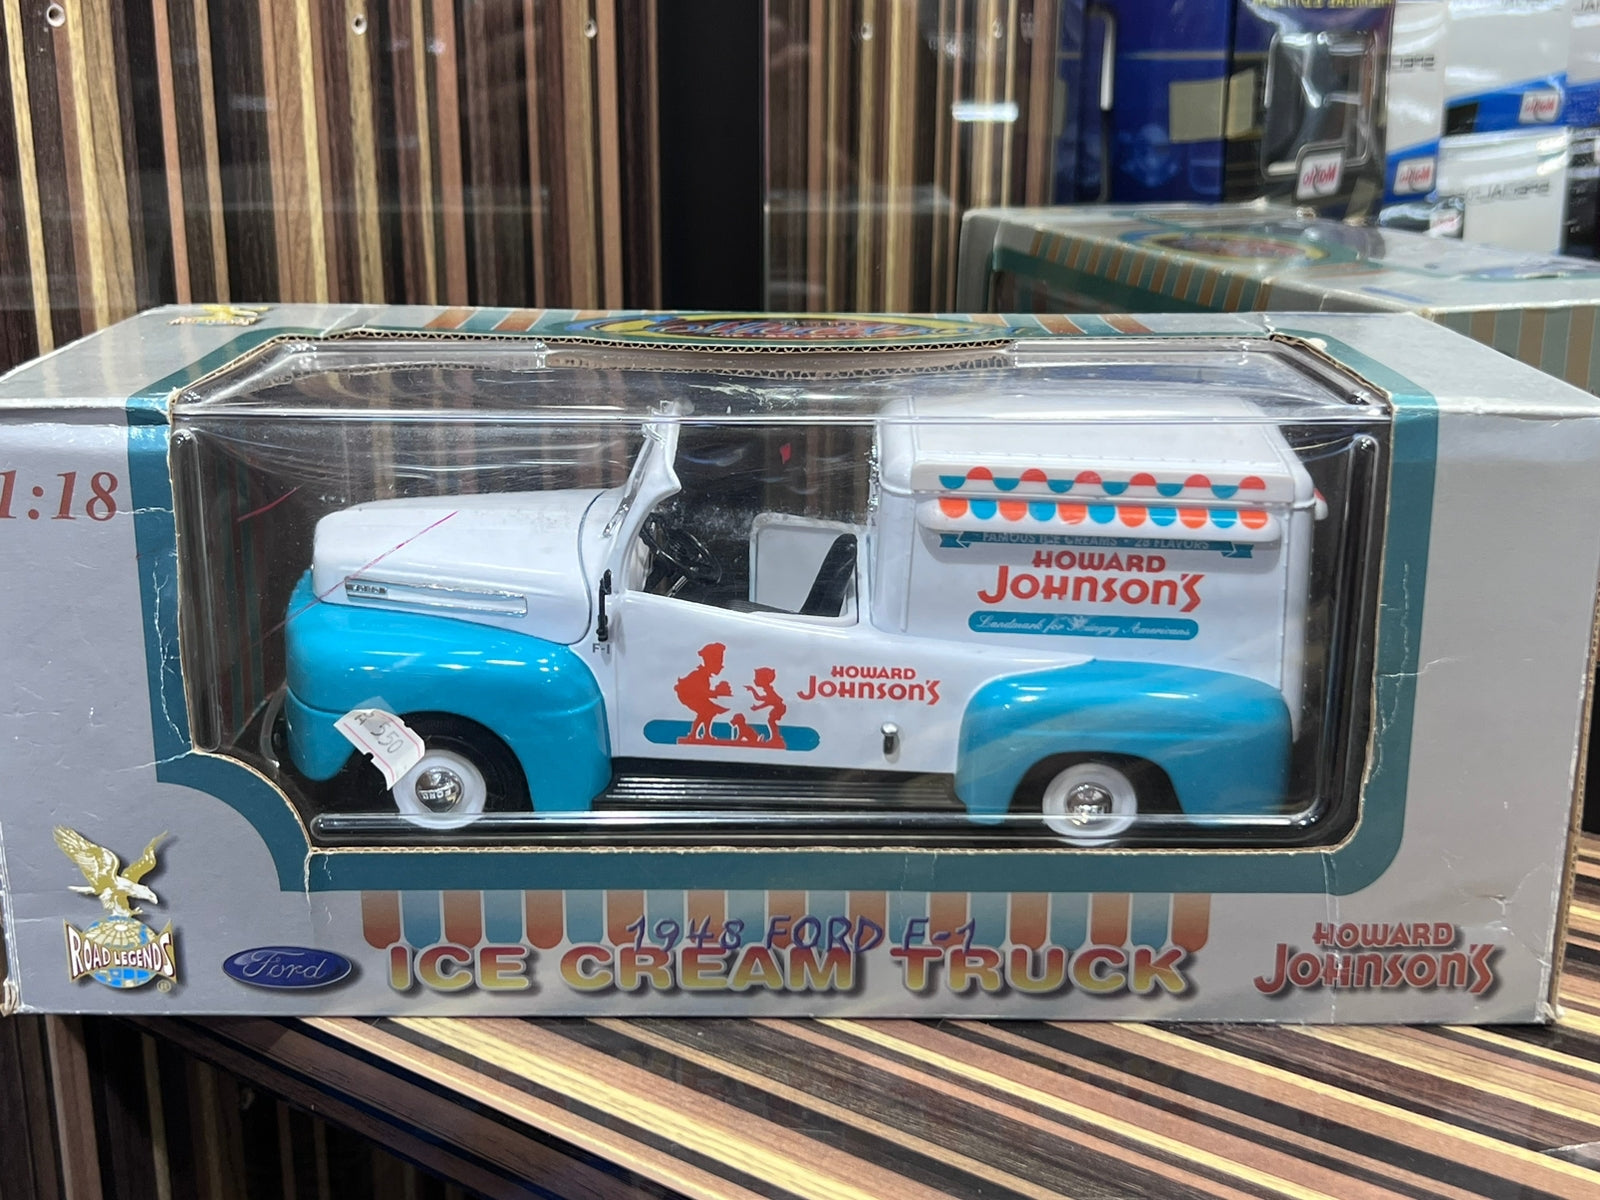 1/18 Diecast Ford Howard Johnon's Ice cream truck by Road Legend